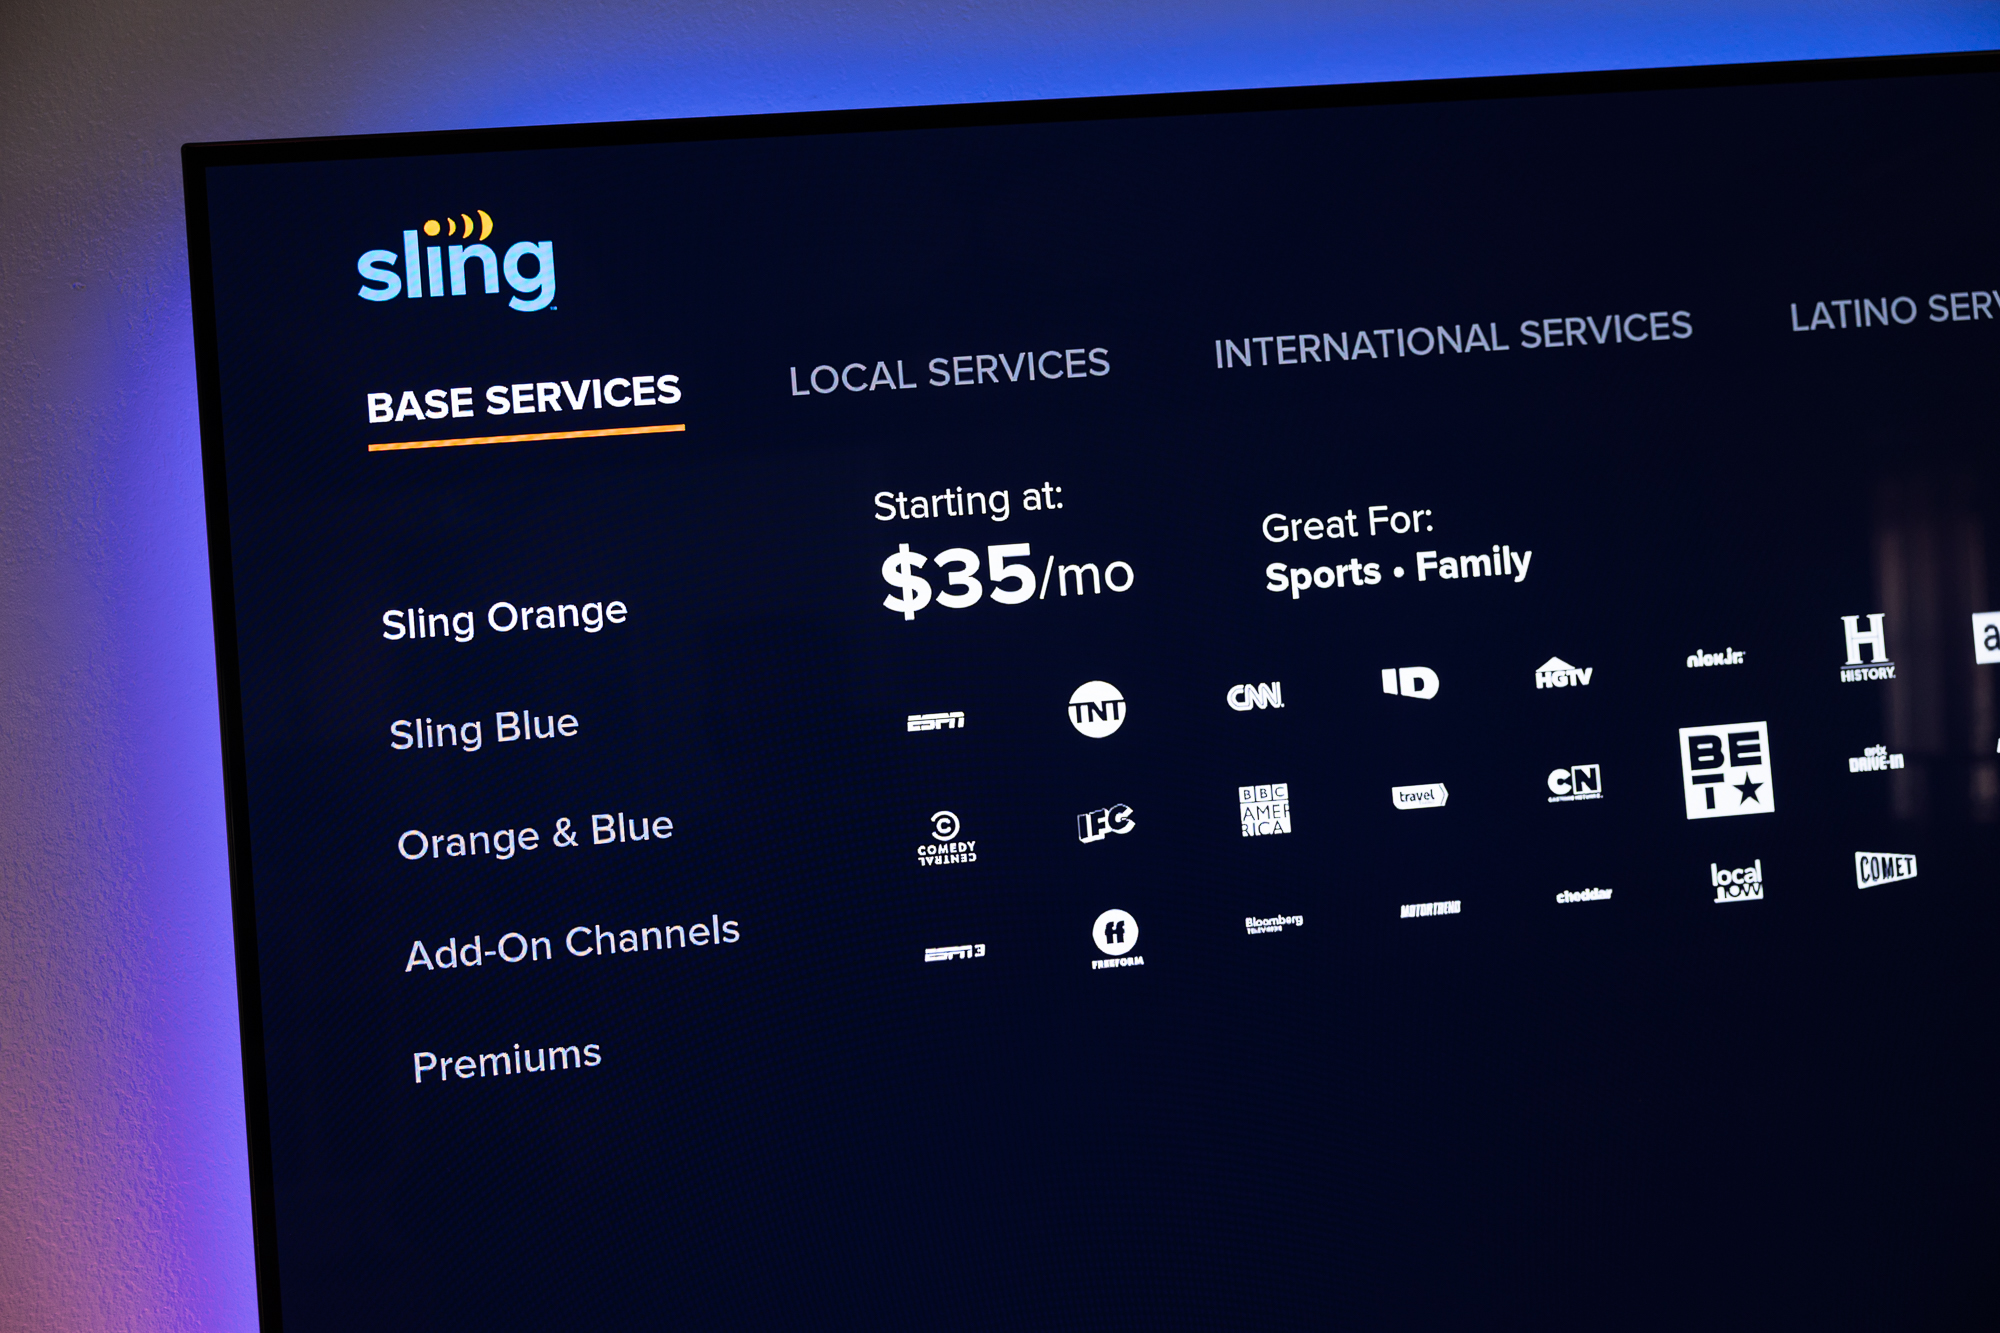 Sling TV Expands Their DVR Service to New Devices